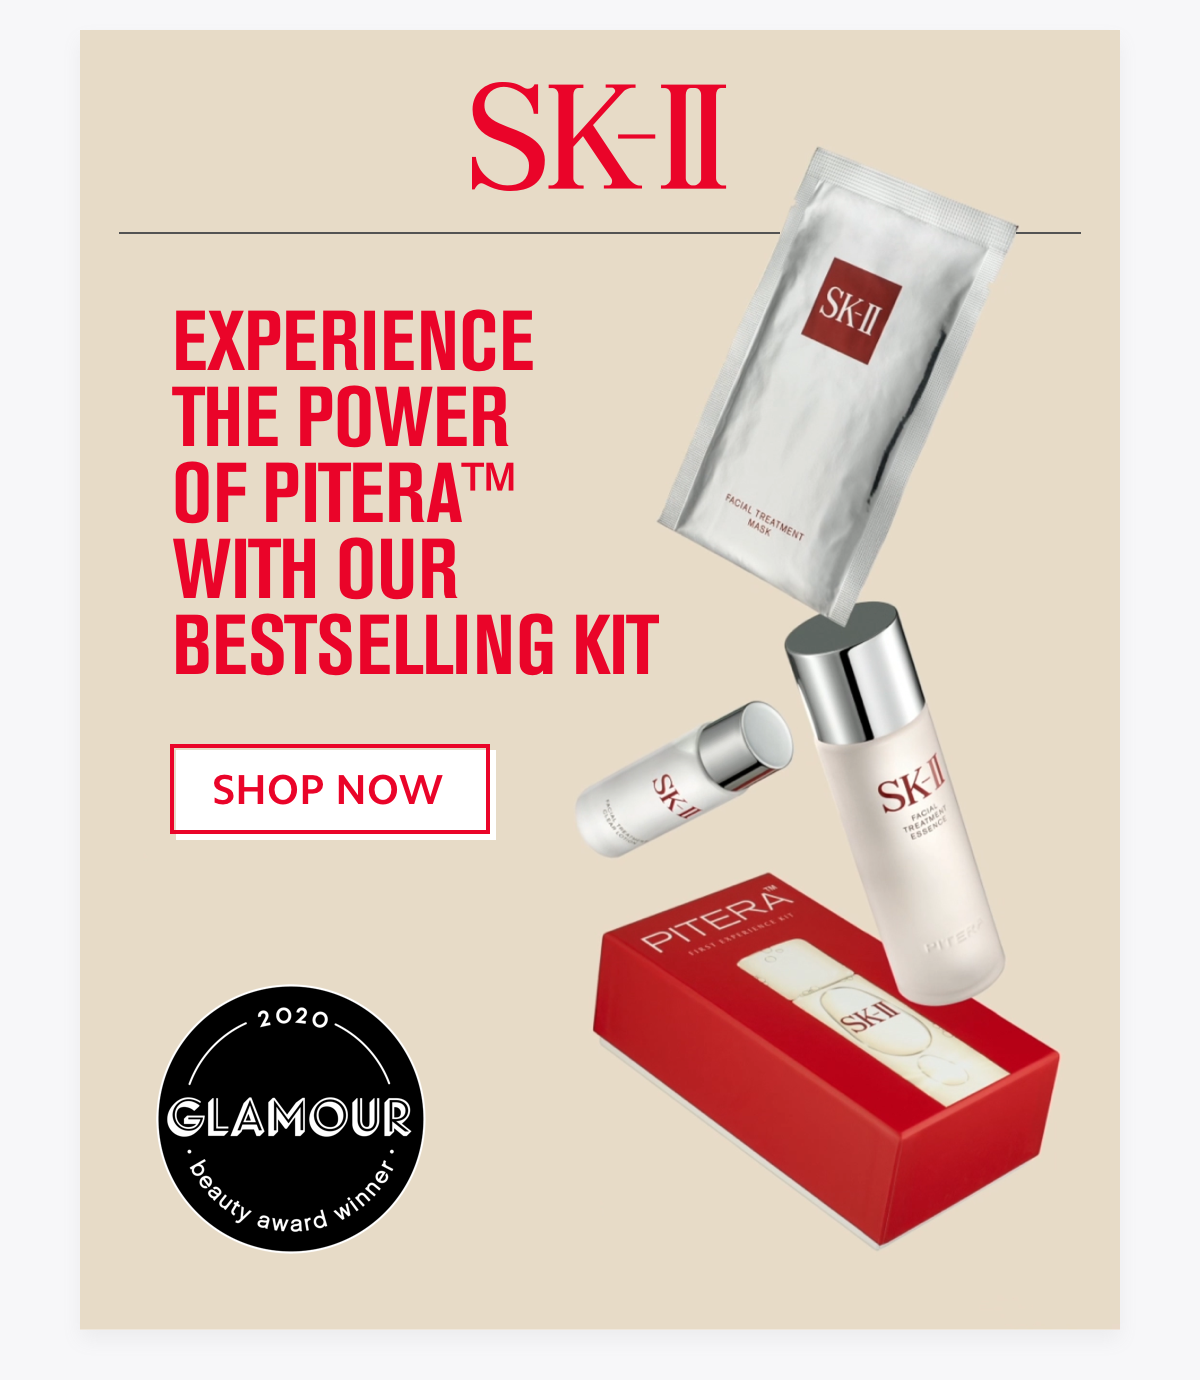 EXPERIENCE THE POWER OF PITERA™ WITH OUR BESTSELLING KIT - SHOP NOW